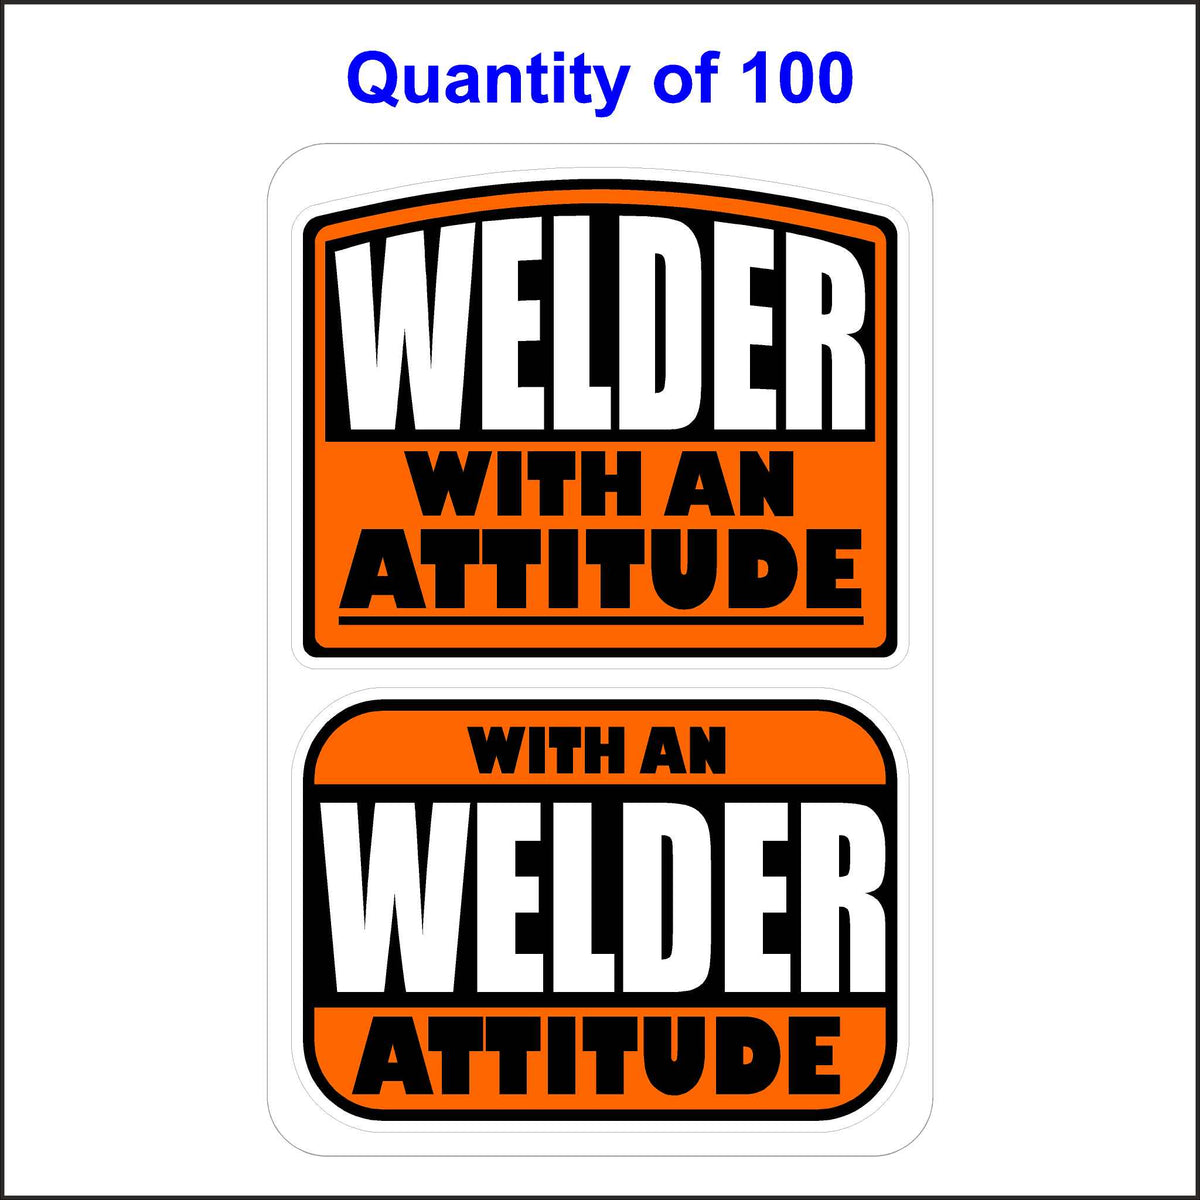 Welder With An Attitude Stickers 100 Quantity.